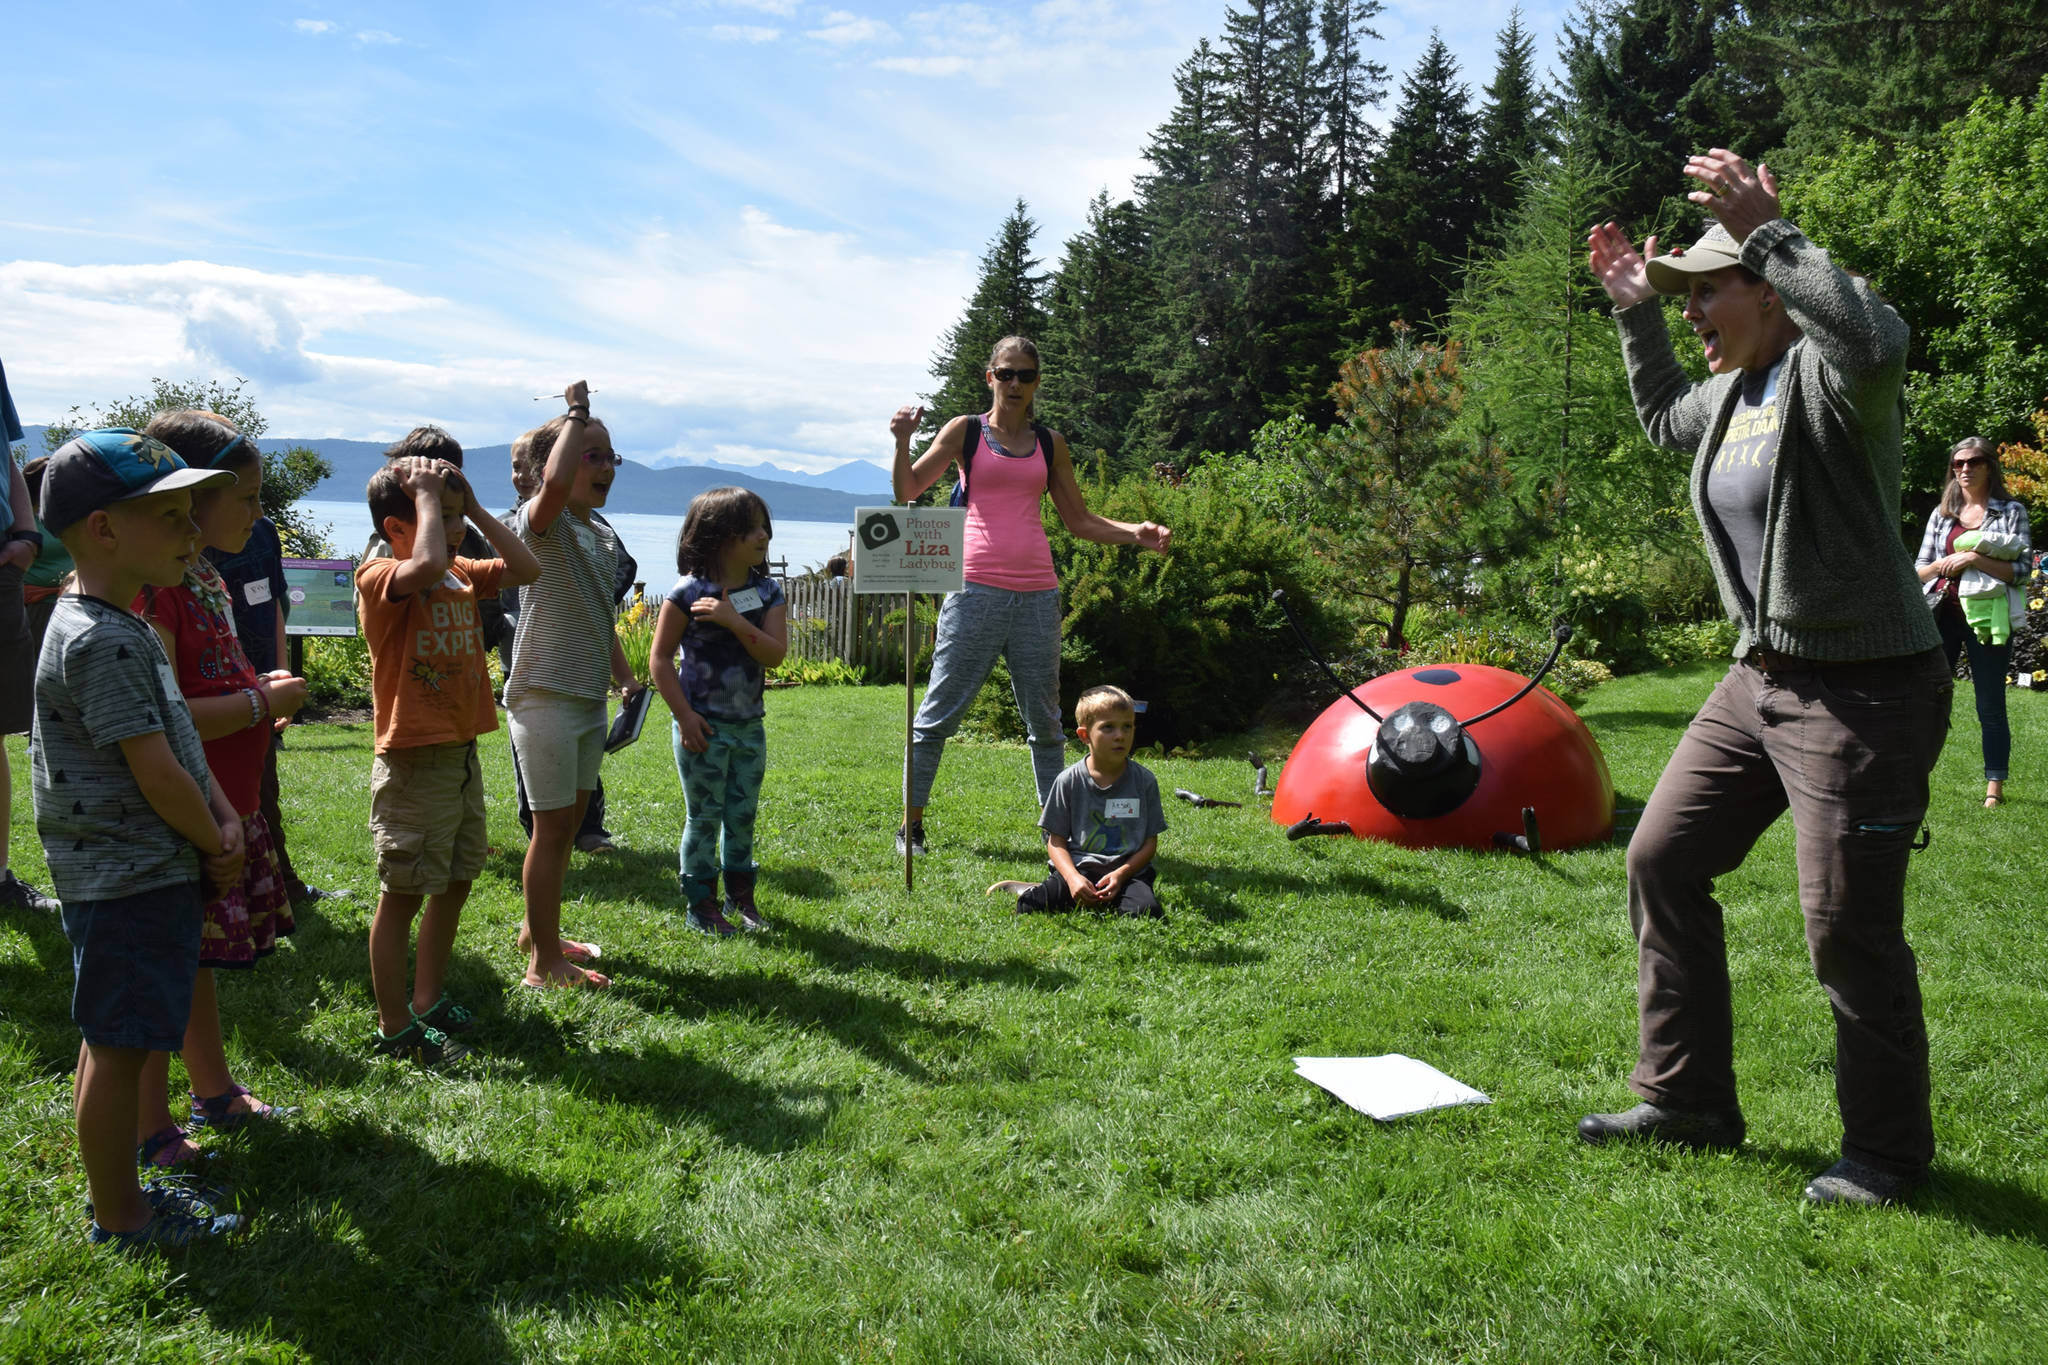 An insect has three body parts, something kids learned with a dance at Bug Day at the Jensen-Olson Arboretum on Saturday, Aug. 11, 2018. (Kevin Gullufsen | Juneau Empire)